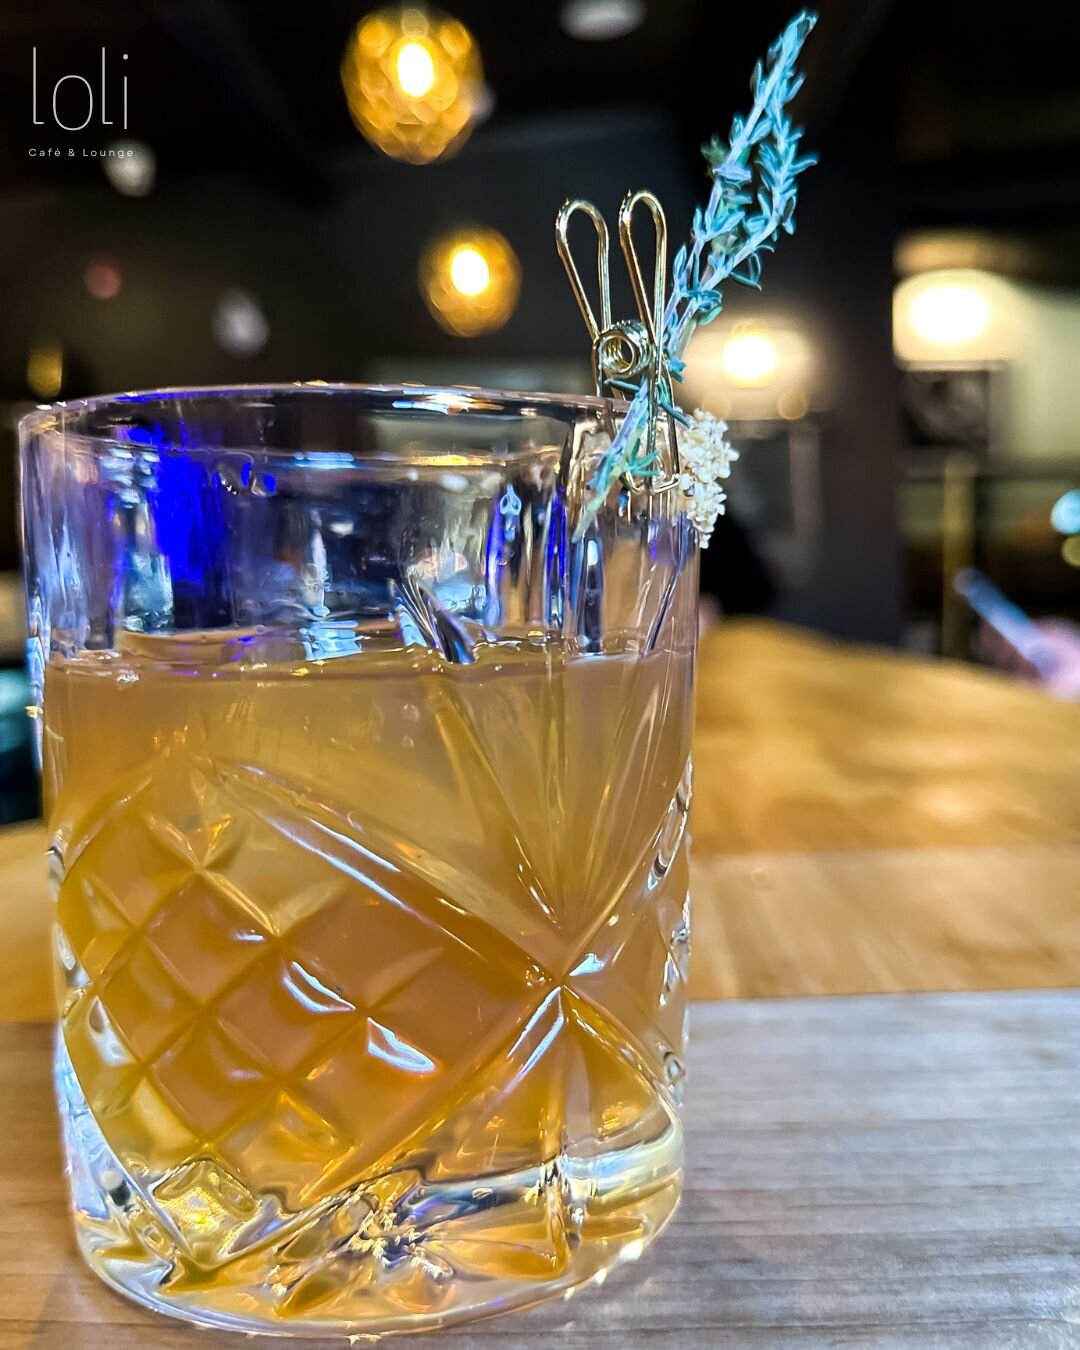 THE GOOD THYME

Another LOLI twist on an old fashioned equipped with honey and thyme notes. Available all weekend long (and hopefully longer, it's so good!) 

This drink pairs well with the music that @djmarkoshi will be playing tomorrow for 'After W